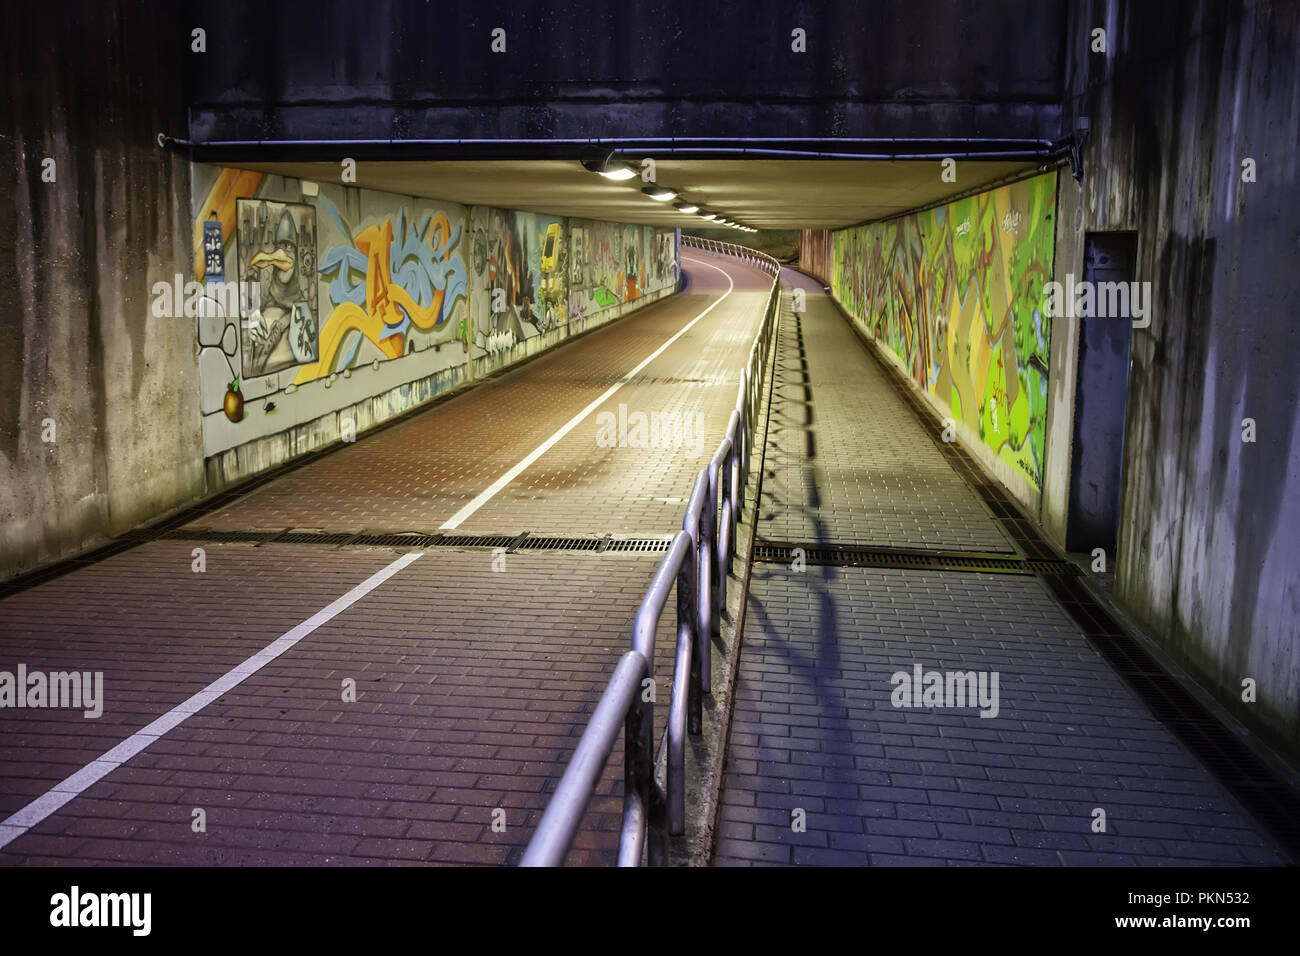 Tunnel with graffiti in bruges, detail of painting and decoration Stock Photo